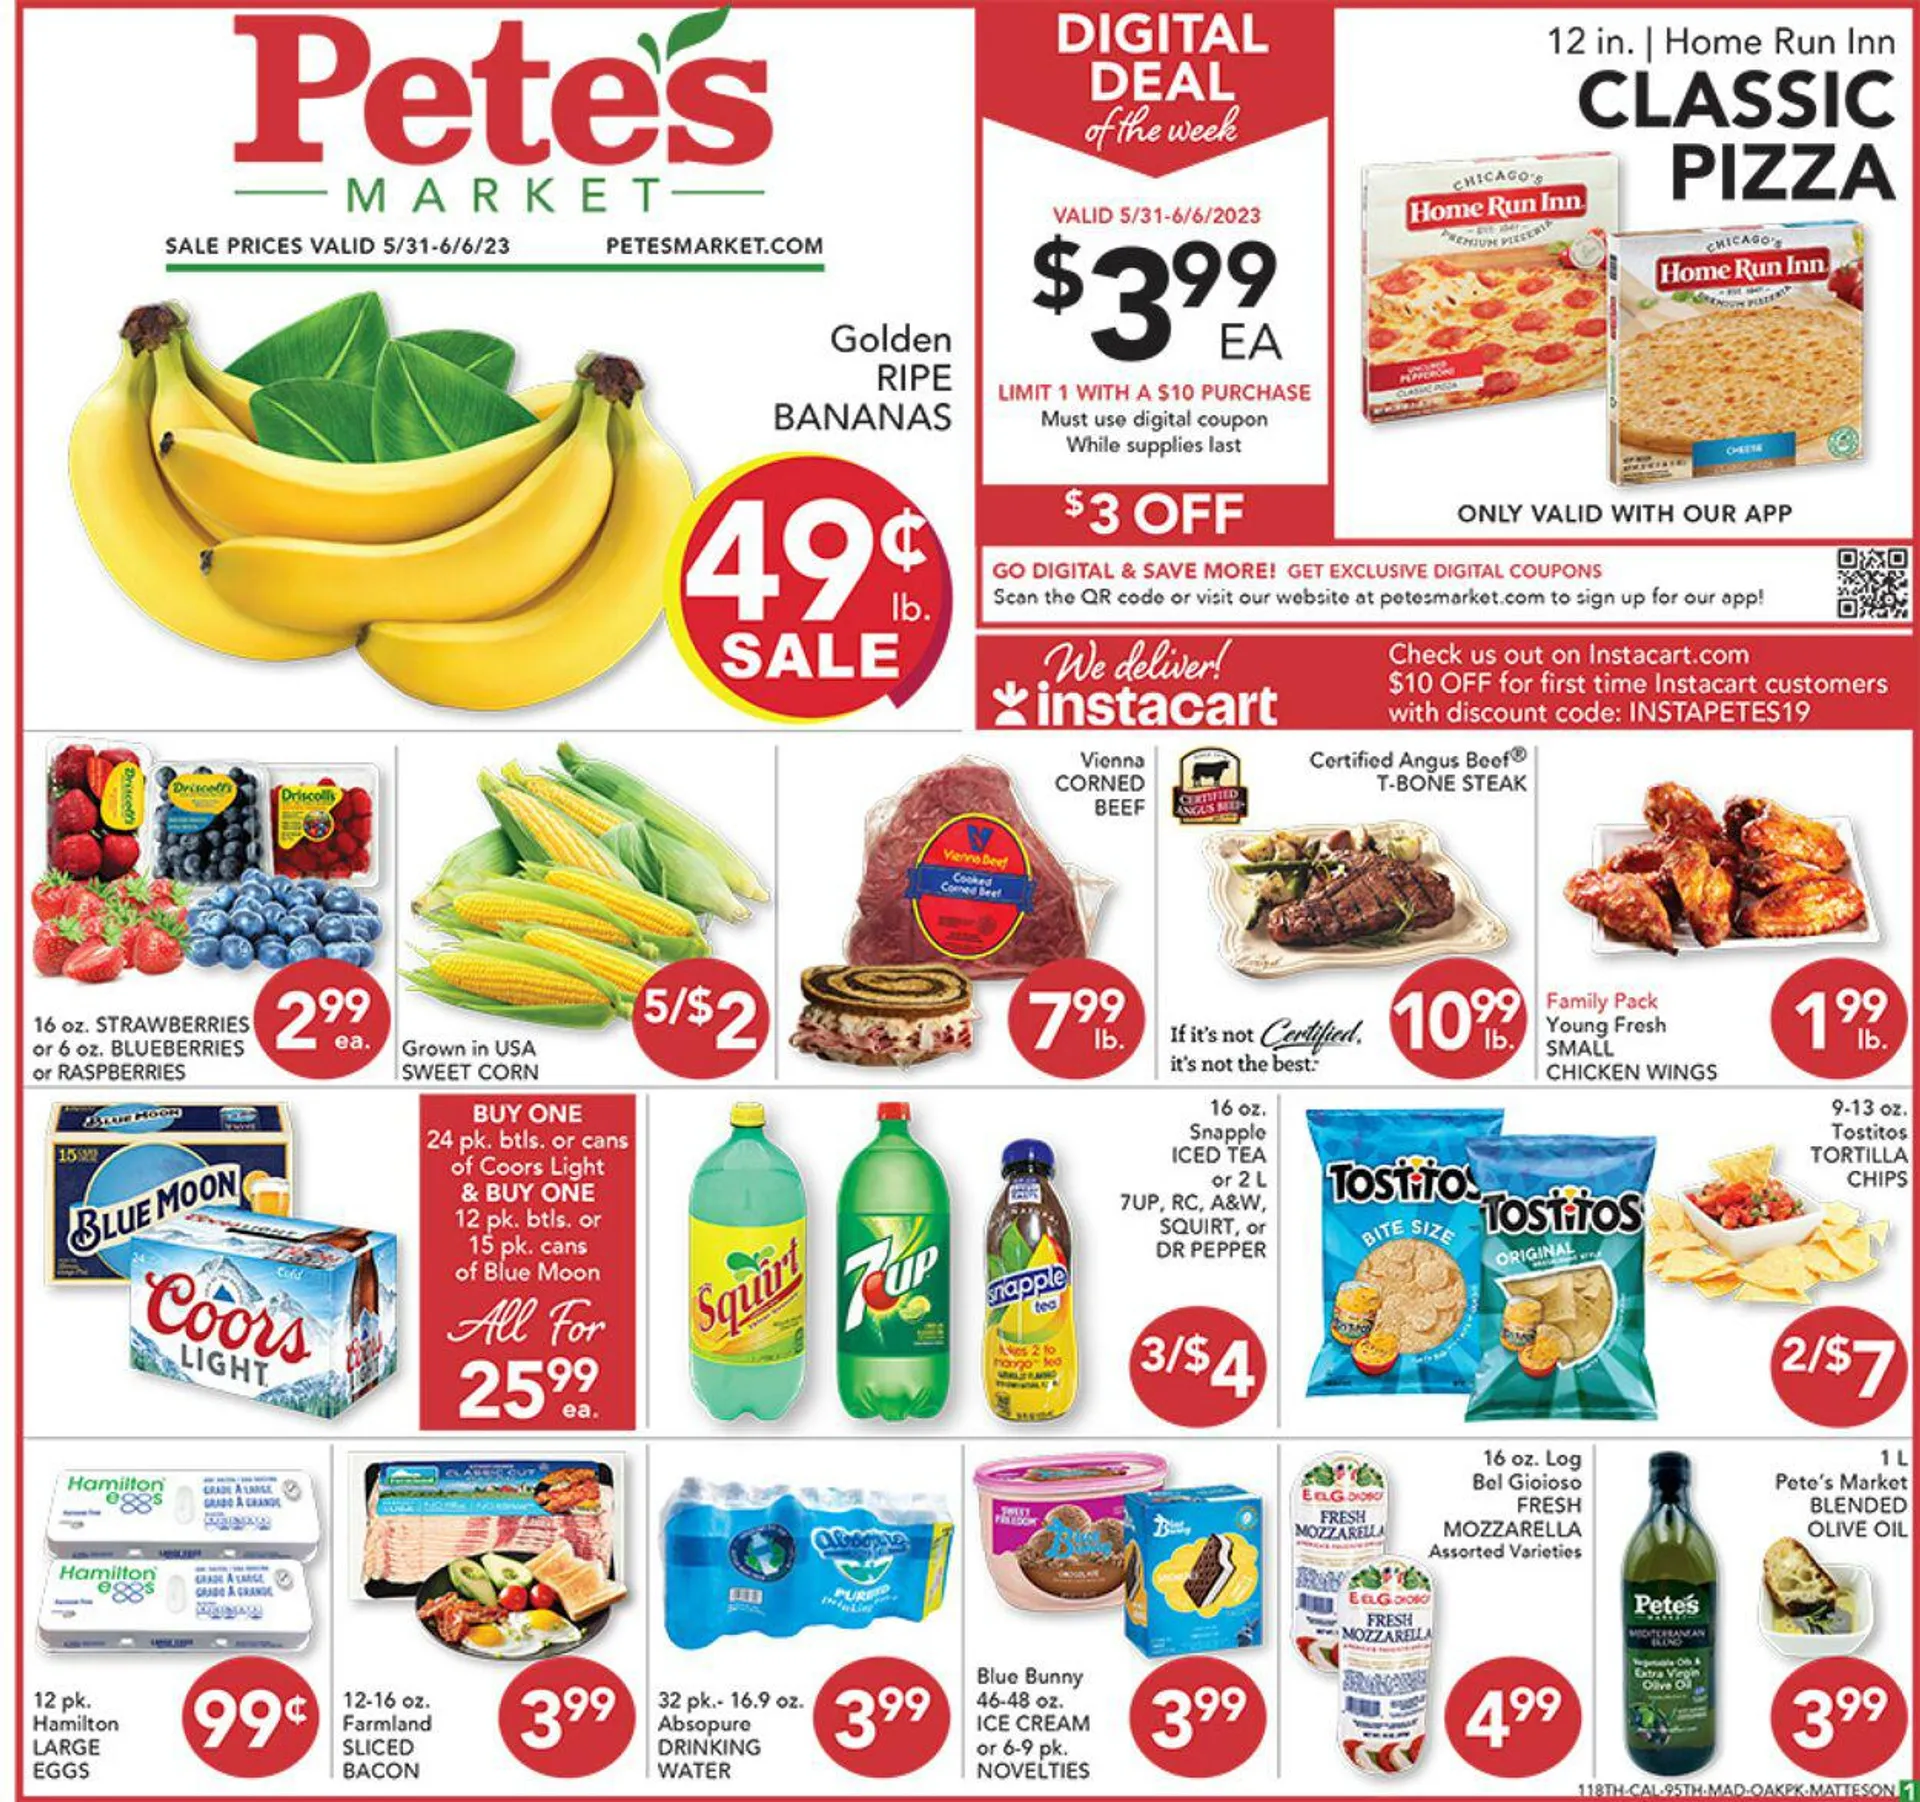 Petes Fresh Market Current weekly ad - 1